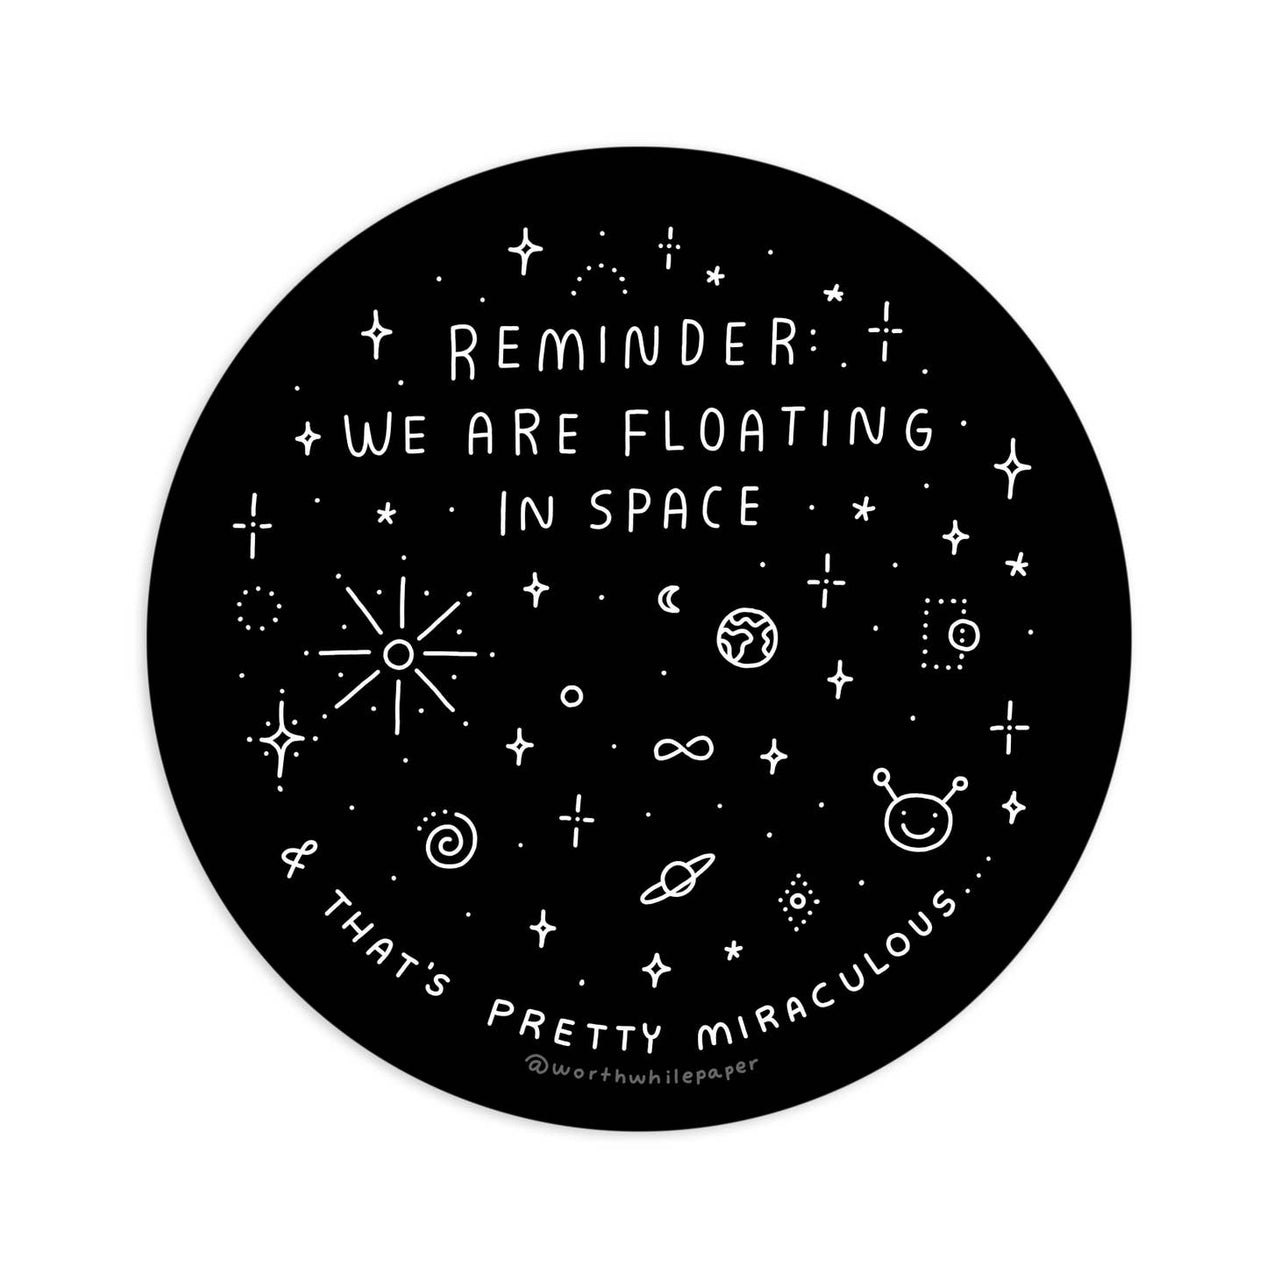 Worthwhile - Reminder: We Are Floating in Space Sticker